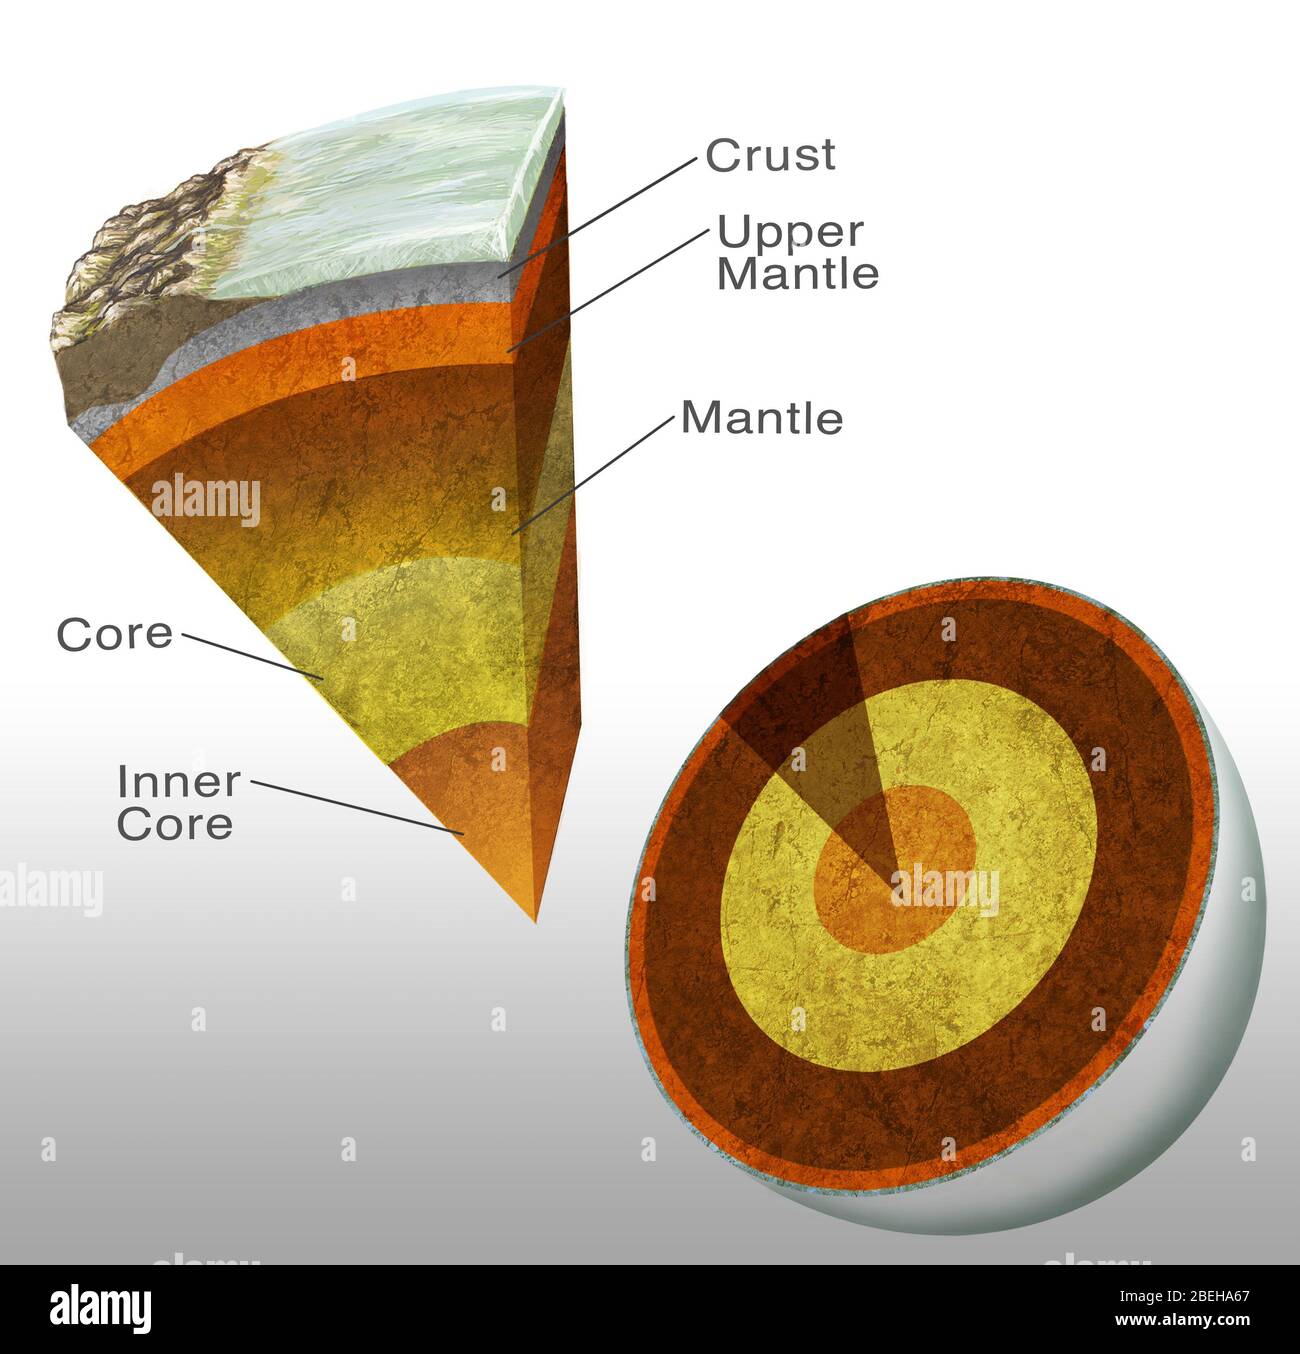 Earth's structure. Cut-away artwork of the internal structure of the Earth. Below the Earth's crust, a zone of near-molten rock called the mantle extends down to 2900 kilometers (km). Beneath the mantle is the nickel-iron core. It is about 7000 km across. The outer core (yellow) is molten and the inner core (orange) is solid. The temperature at the core may be over 5000 degrees Celsius. Stock Photo